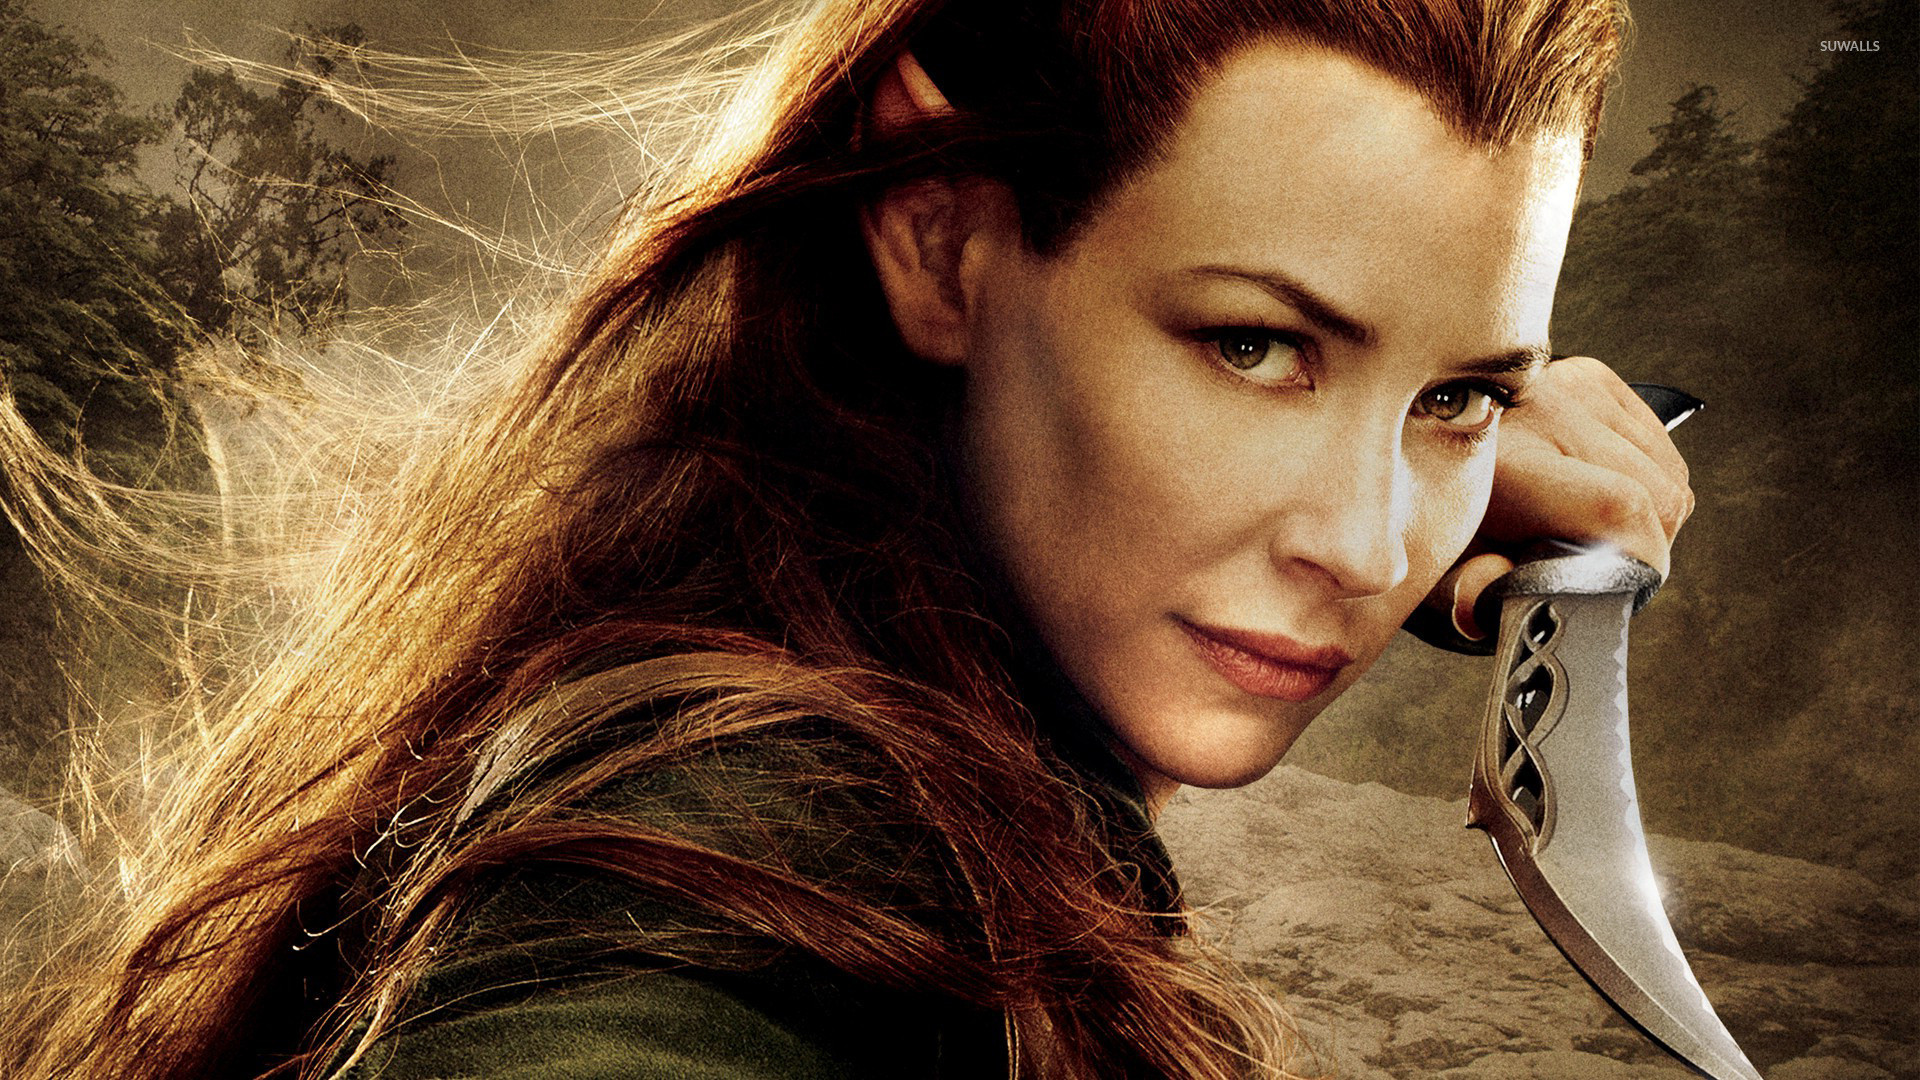 1920x1080 Tauriel - The Hobbit: The Desolation of Smaug wallpaper